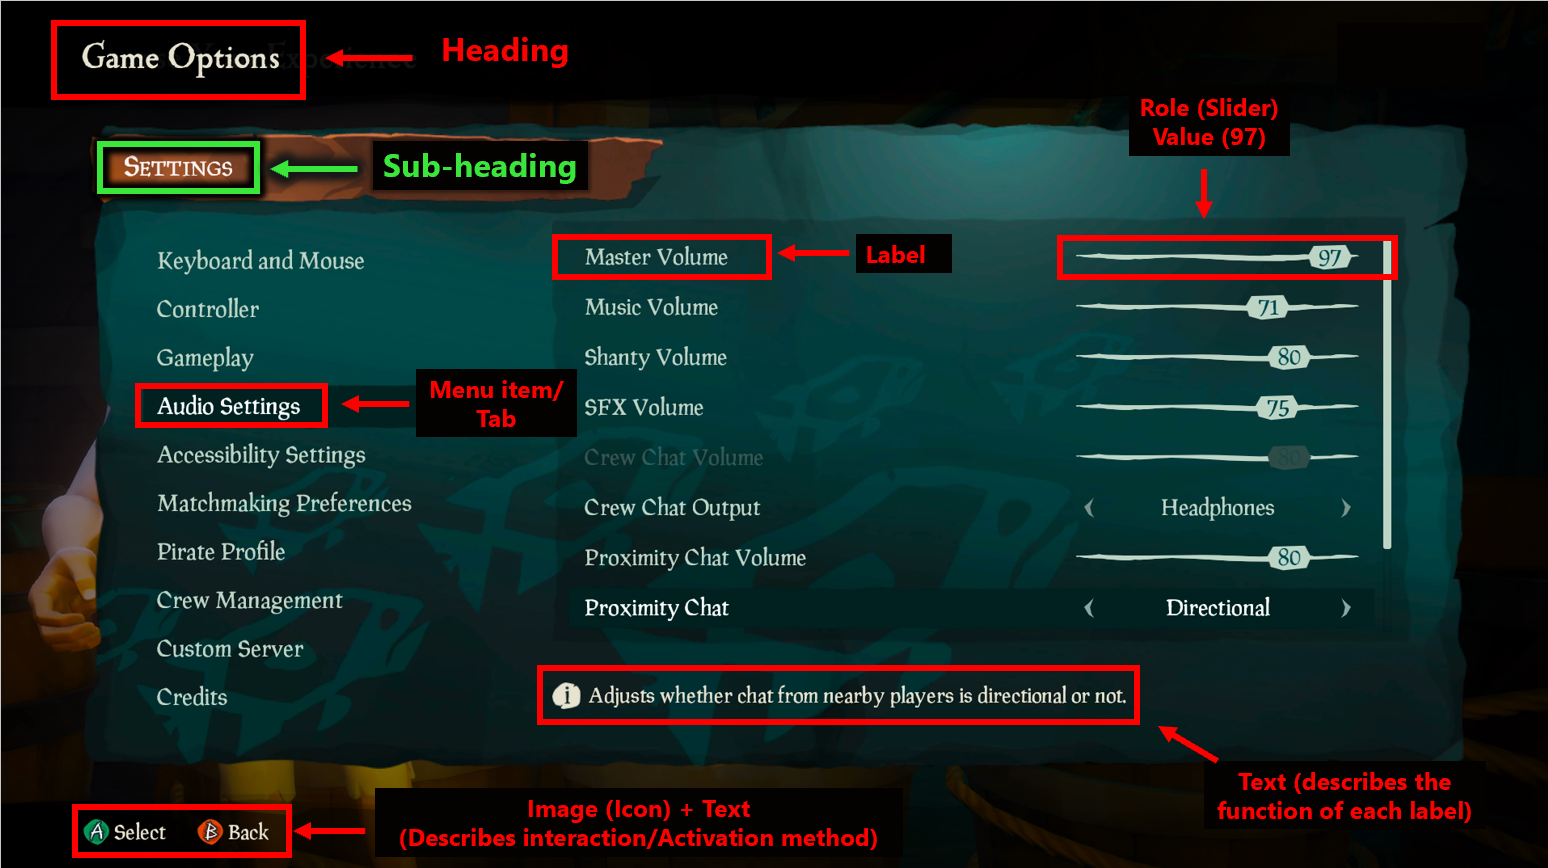 Sea of Thieves audio settings menu with areas of the menu labeled. The title "game options" is labeled "heading." The menu title "settings" is labeled "sub-heading." The different game settings options like audio settings or controller are labeled "Menu item/tab." The settings within the audio settings menu like master volume or crew chat volume are labeled "label." The slider next to master volume has a label that says "Role (slider), Value (97)." At the bottom of the settings menu, there's a tip that describes what the setting does. This is labeled "Text (describes the function of each label)." In the bottom left, there are button symbols "A" for select and "B" for back. This is labeled ""image (icon) plus text. Describes interaction slash activation method."